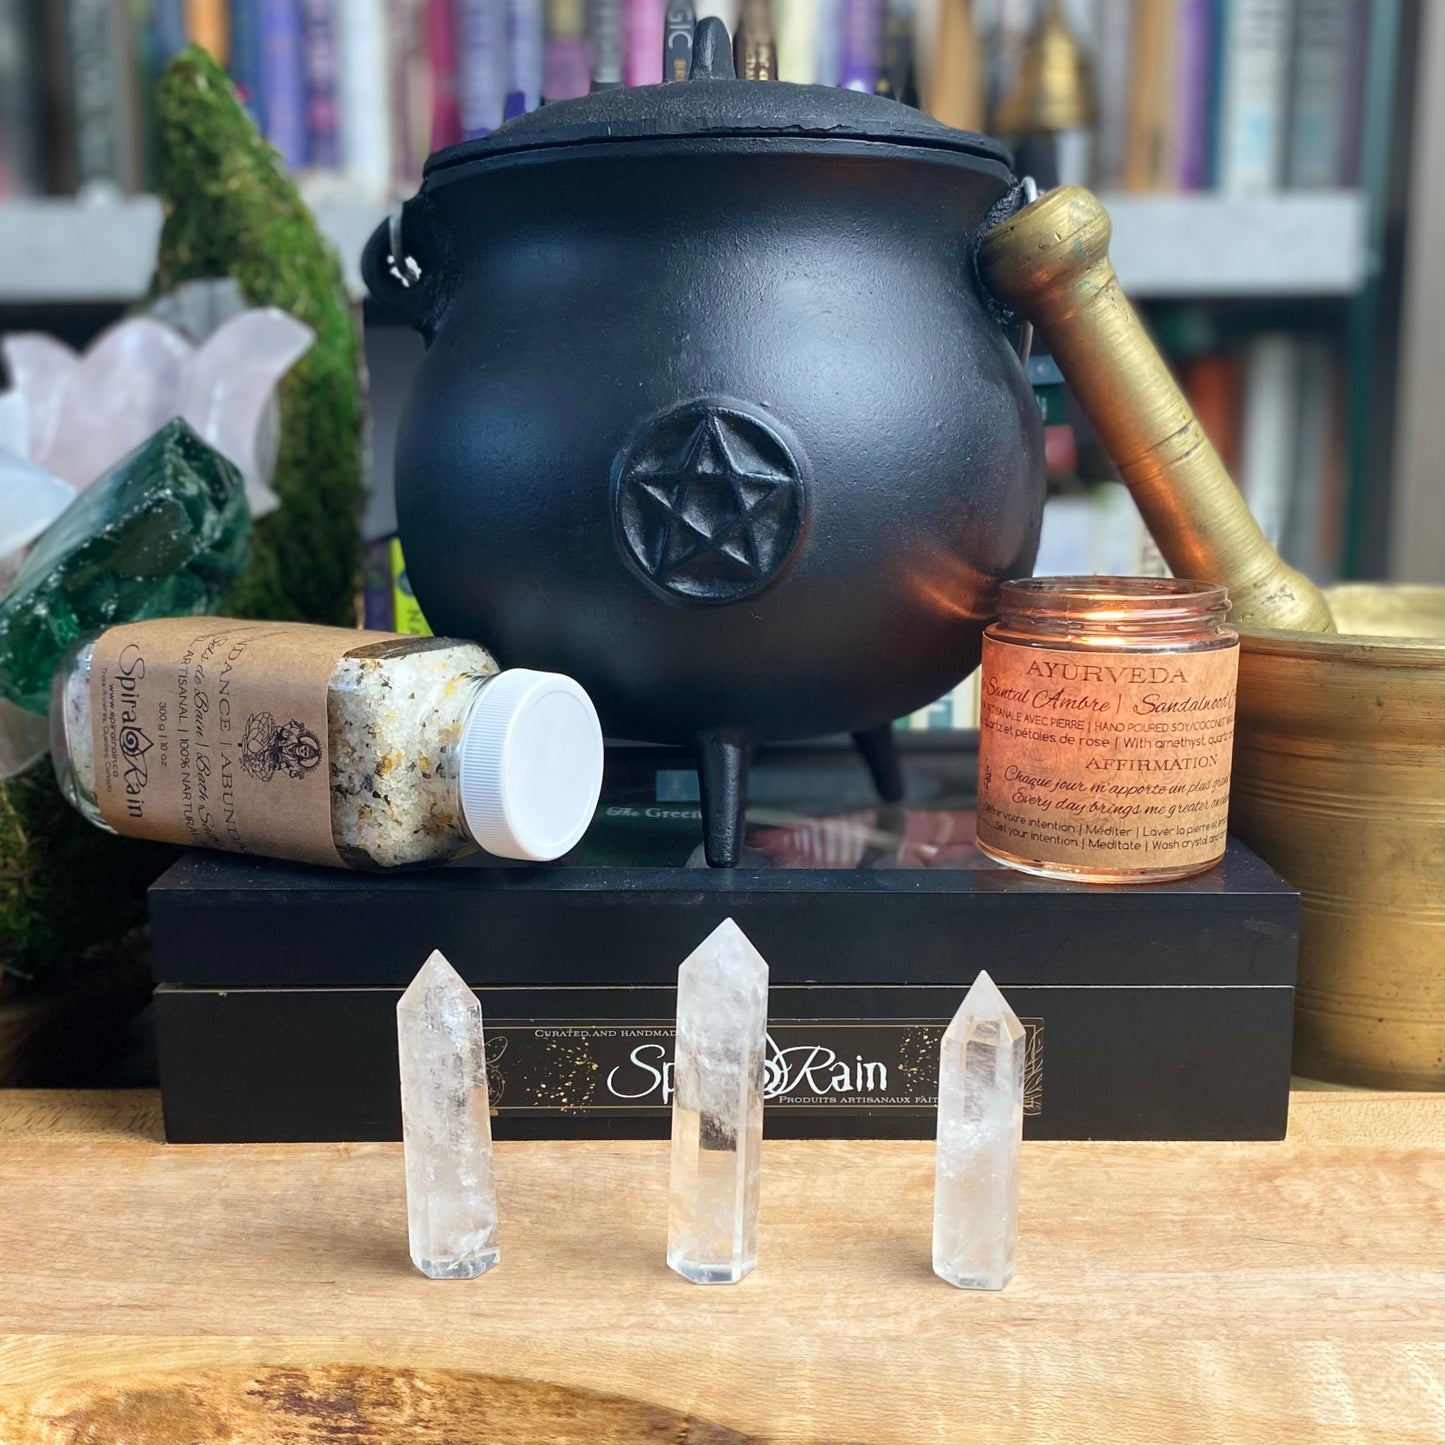 Clear Quartz Tower at $10 only from Spiral Rain